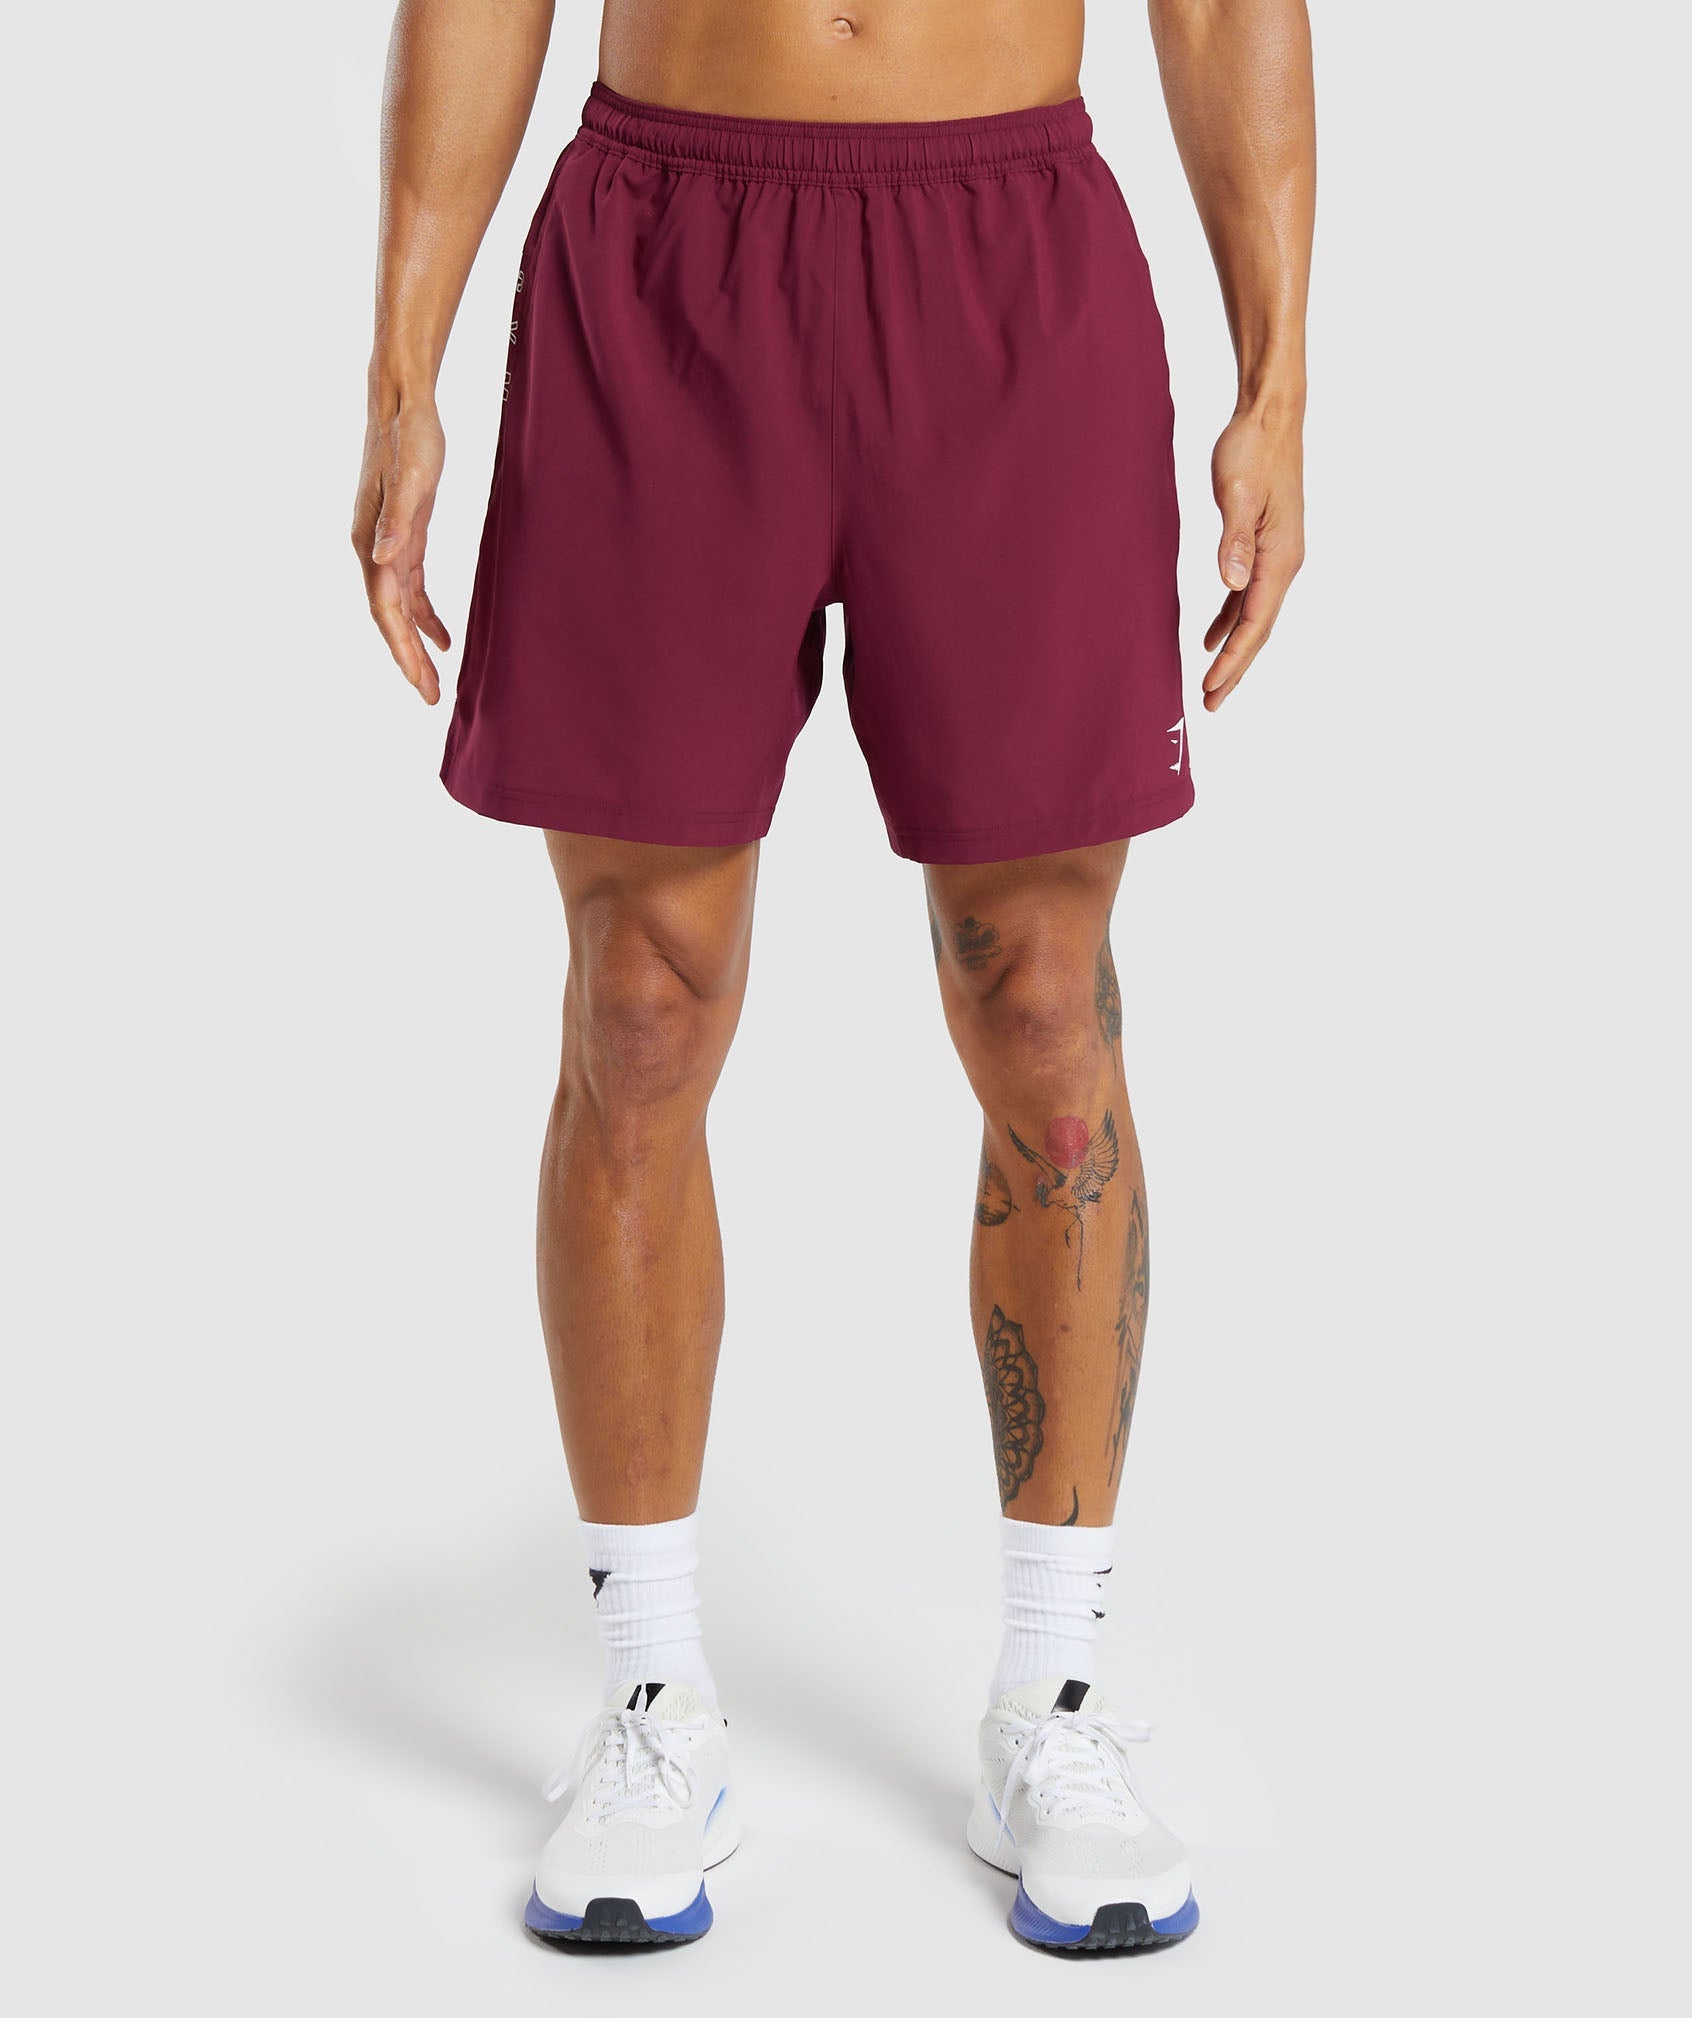 Strike Shorts in Plum Pink - view 2